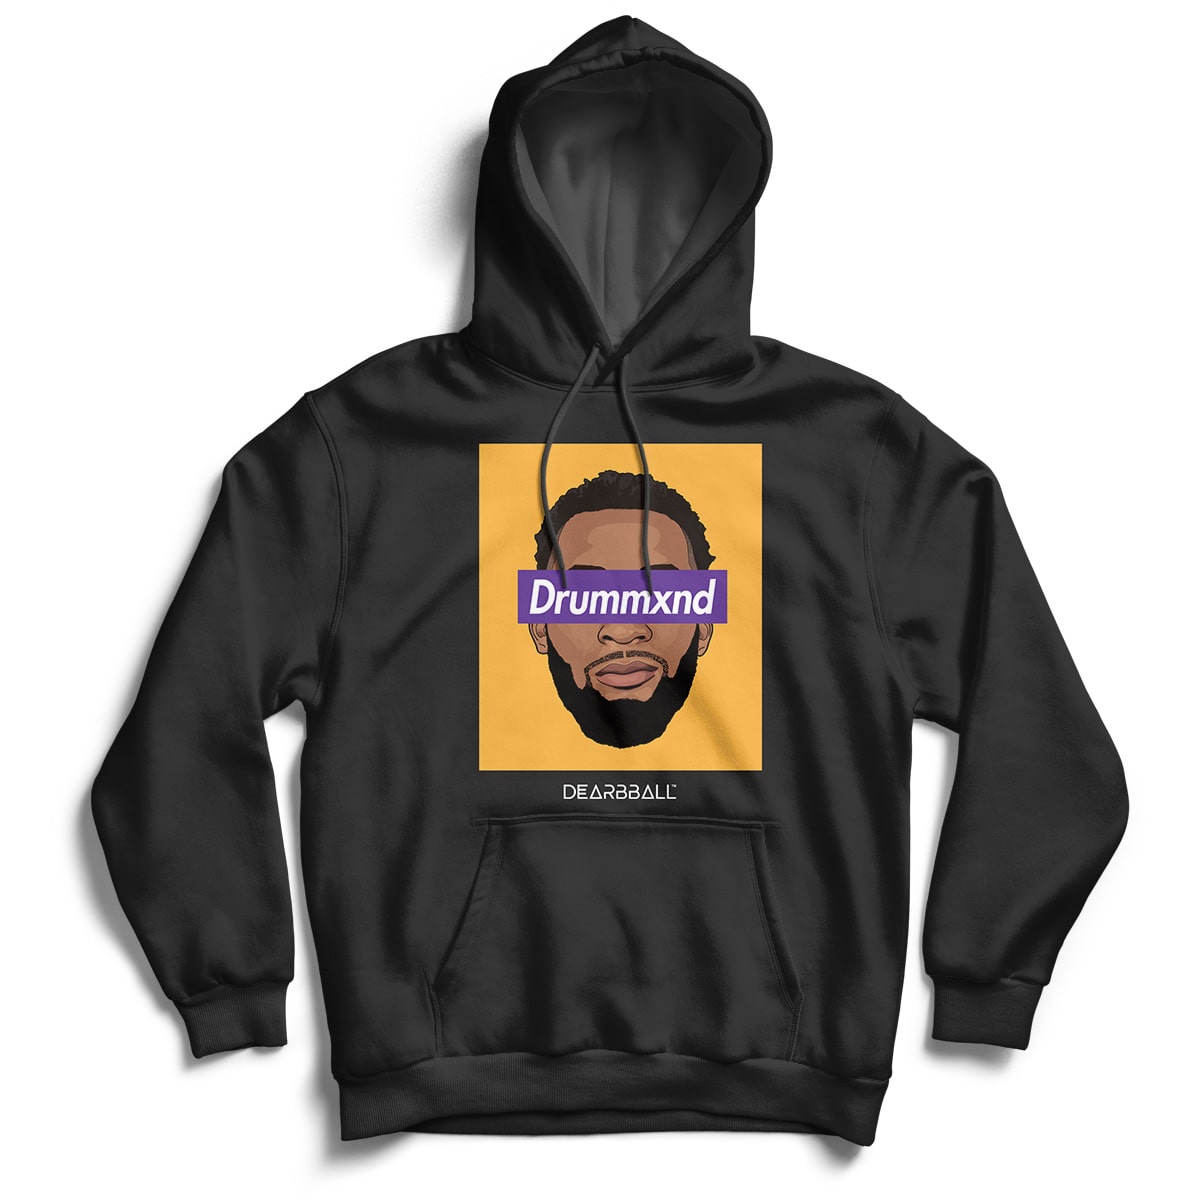 Andre Drummond Hoodie - Drummxnd LA Yellow Los Angeles Lakers Basketball Dearbball white